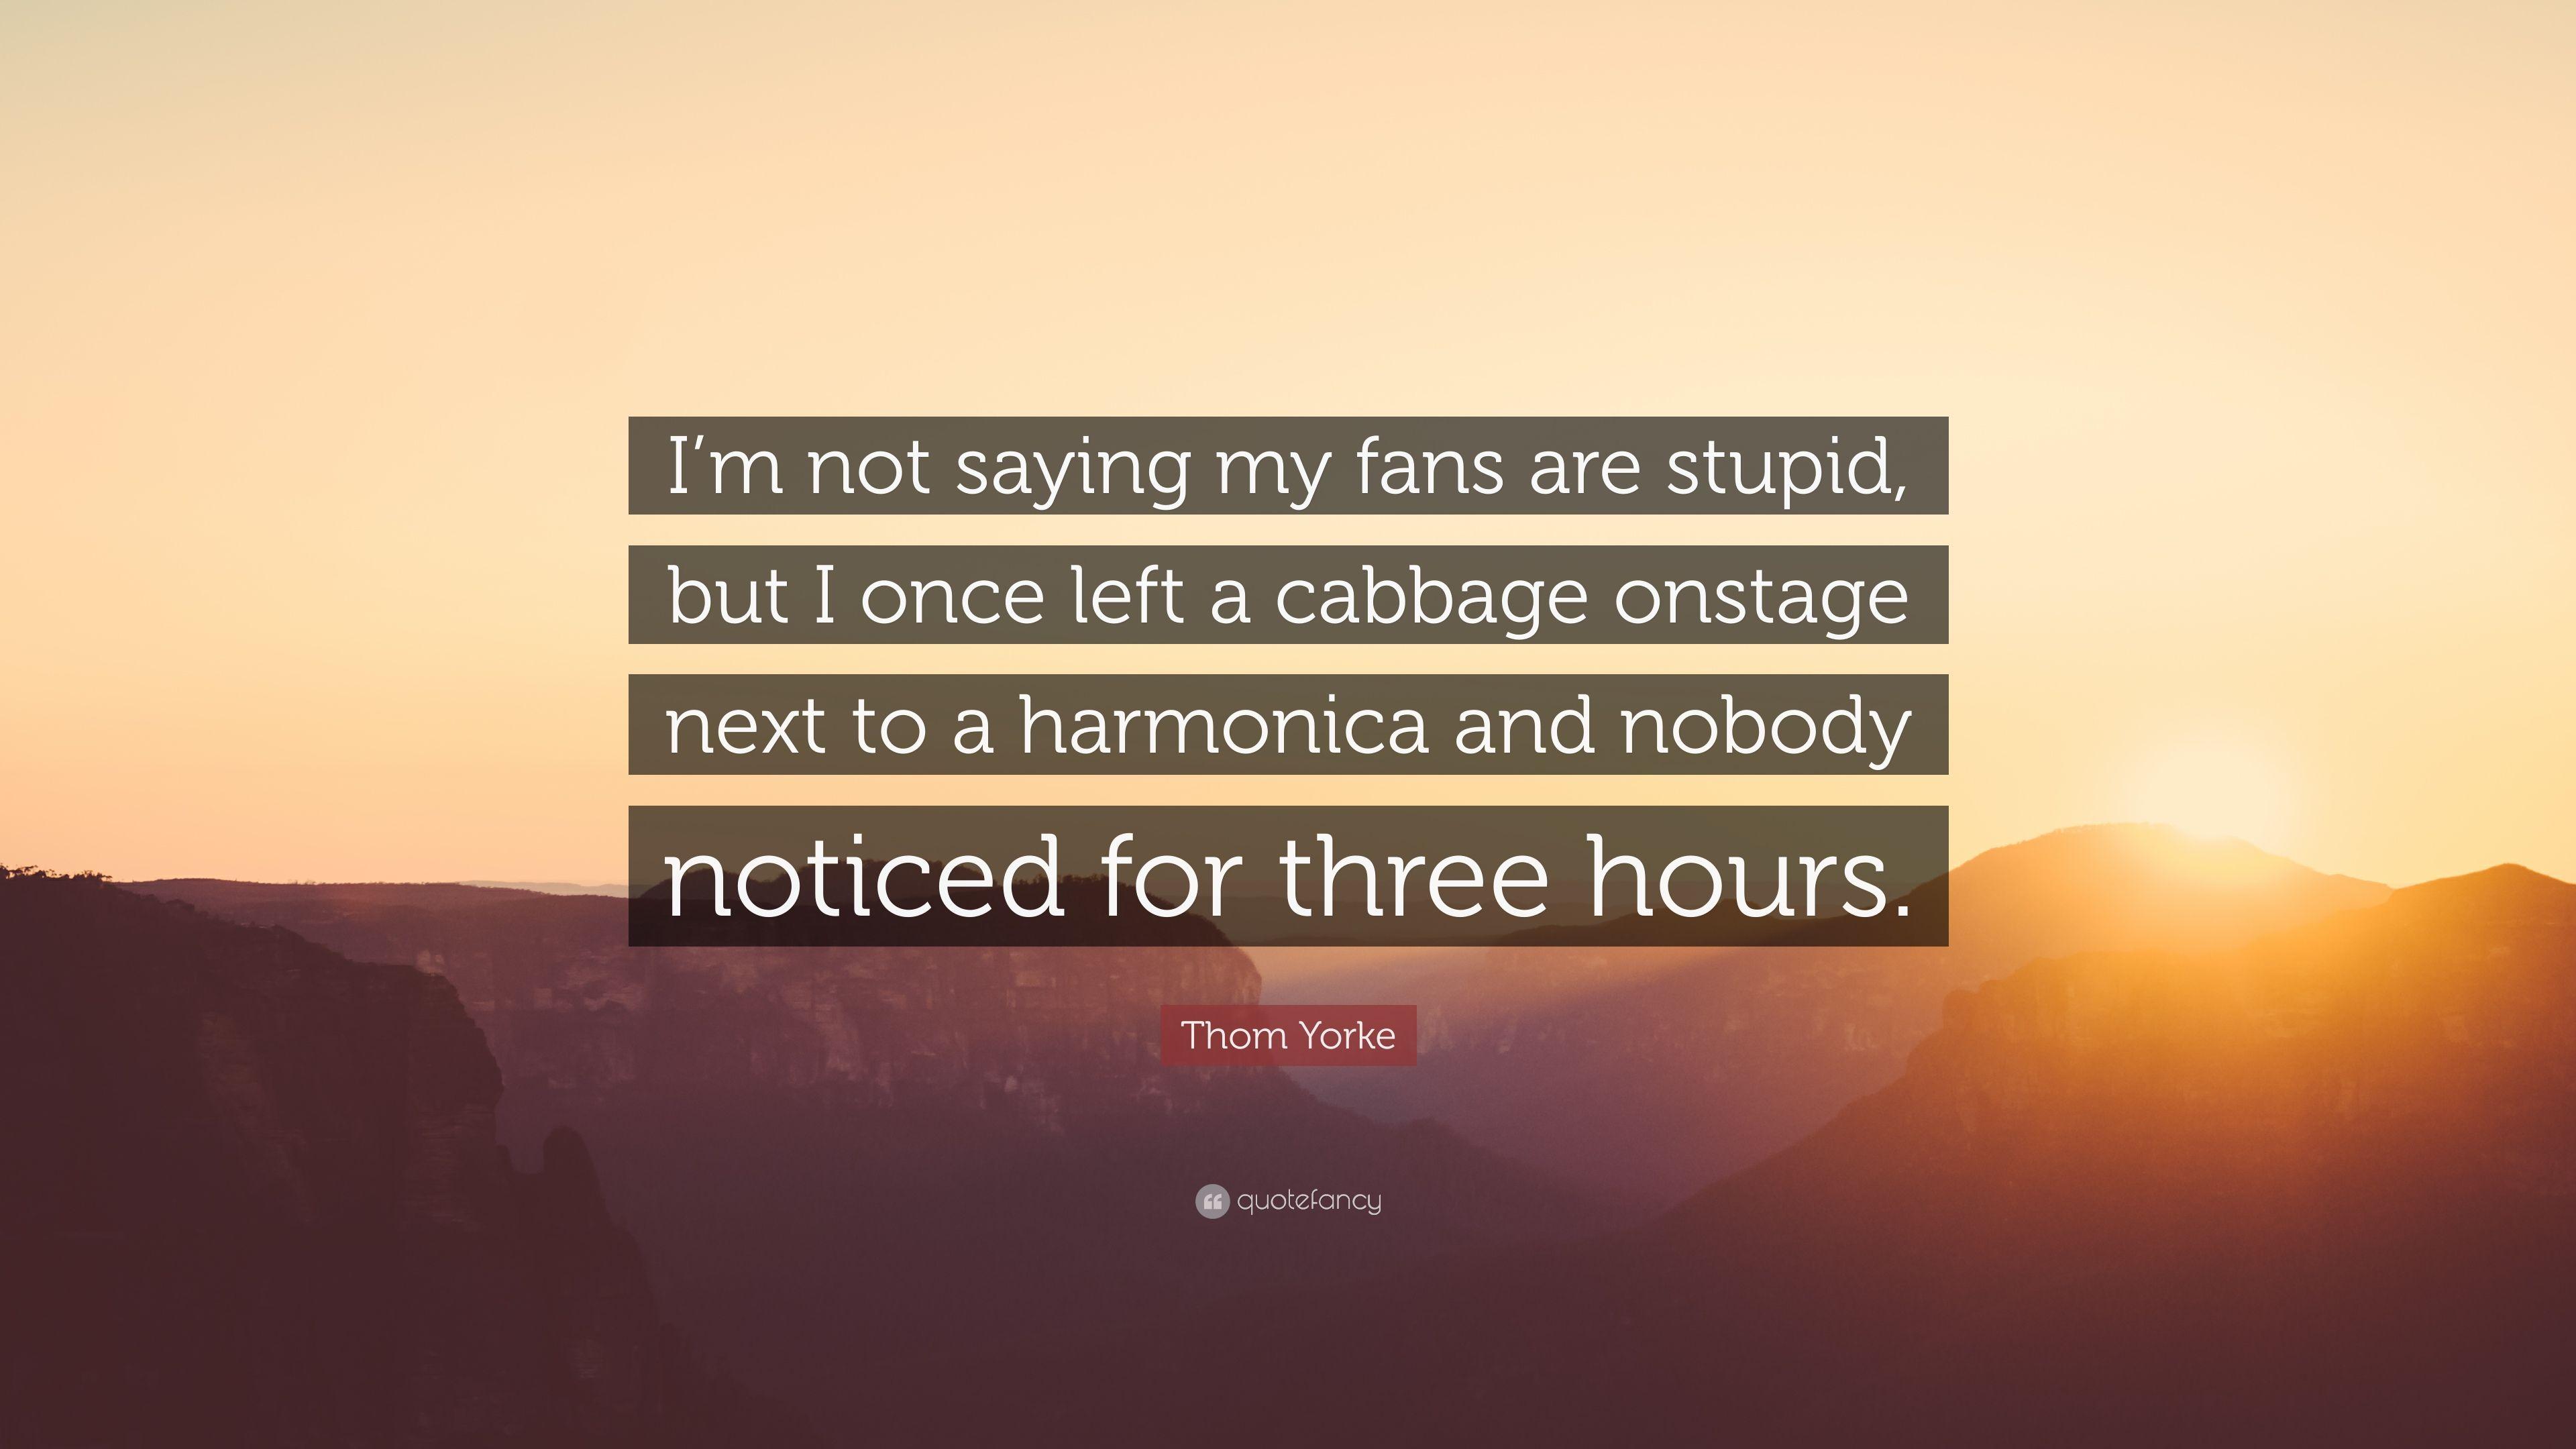 Thom Yorke Quote: “I'm not saying my fans are stupid, but I once